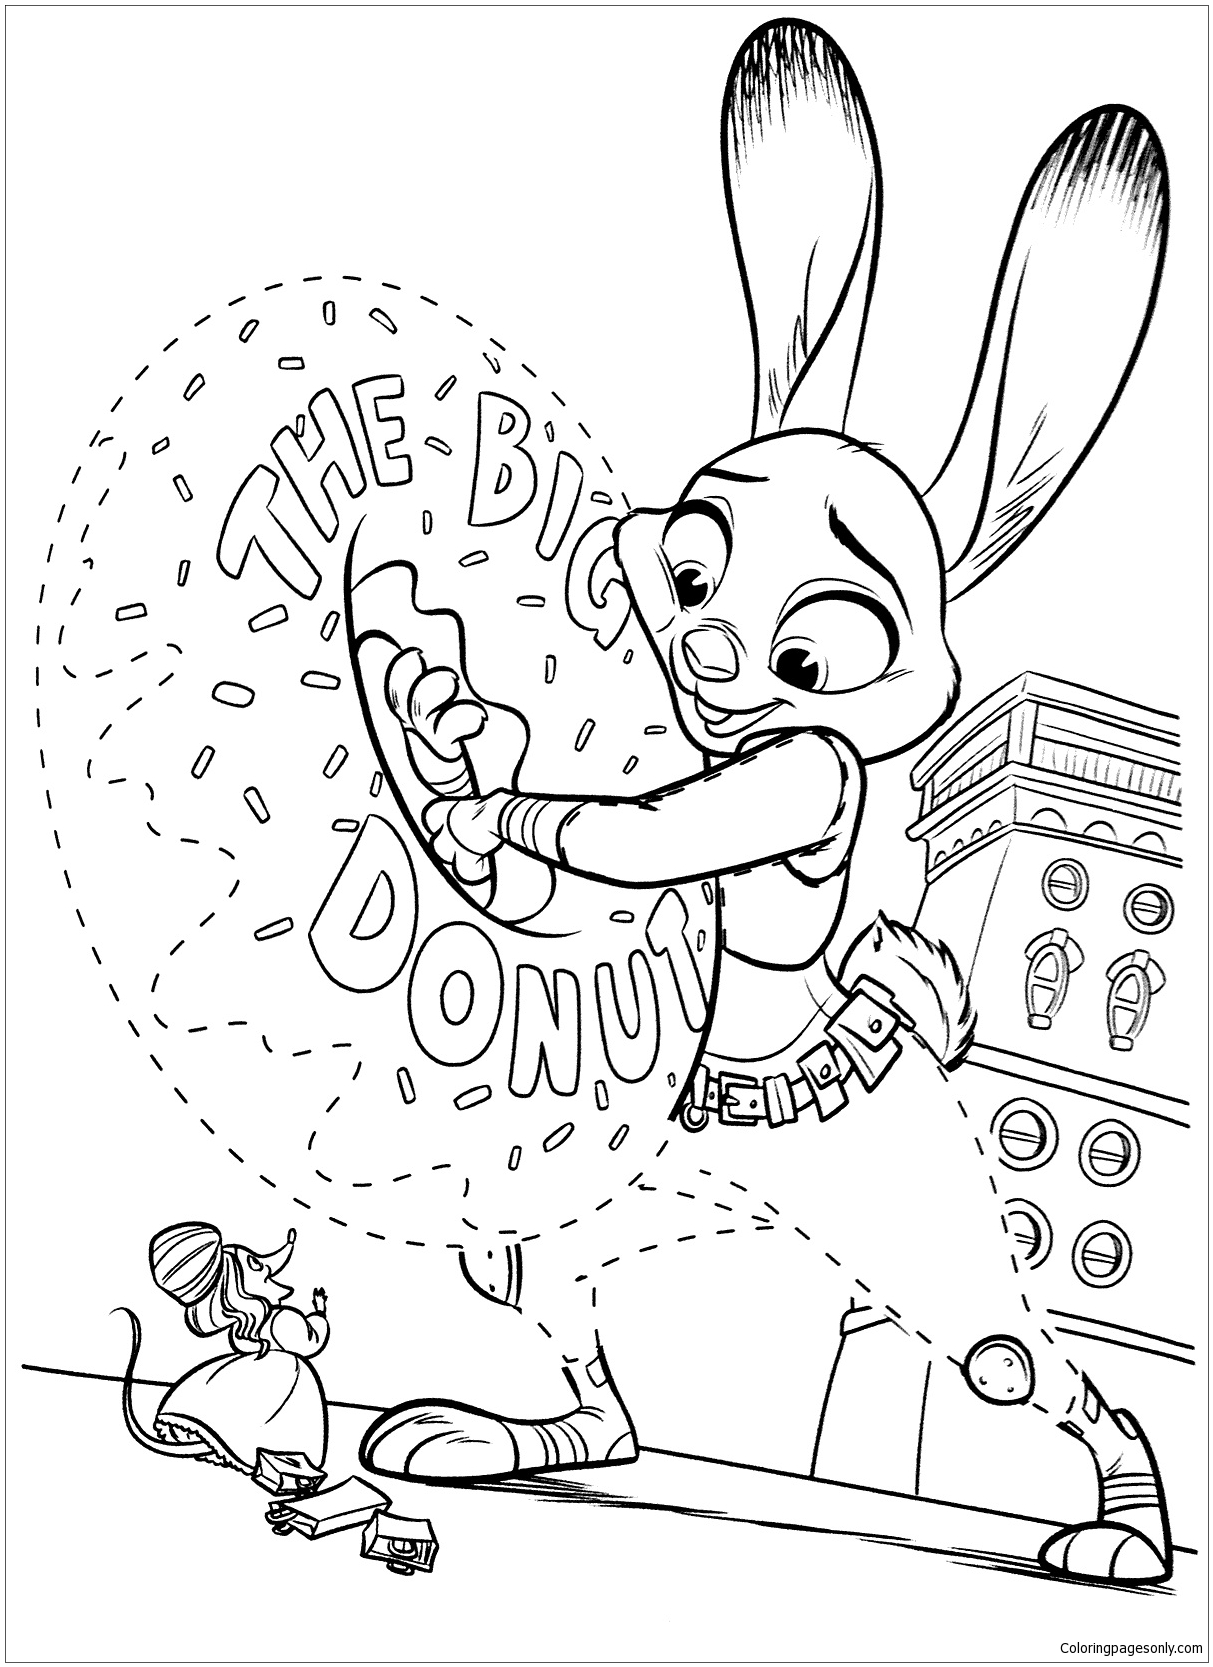 Zootopia   image 20 Coloring Pages   Cartoons Coloring Pages ...